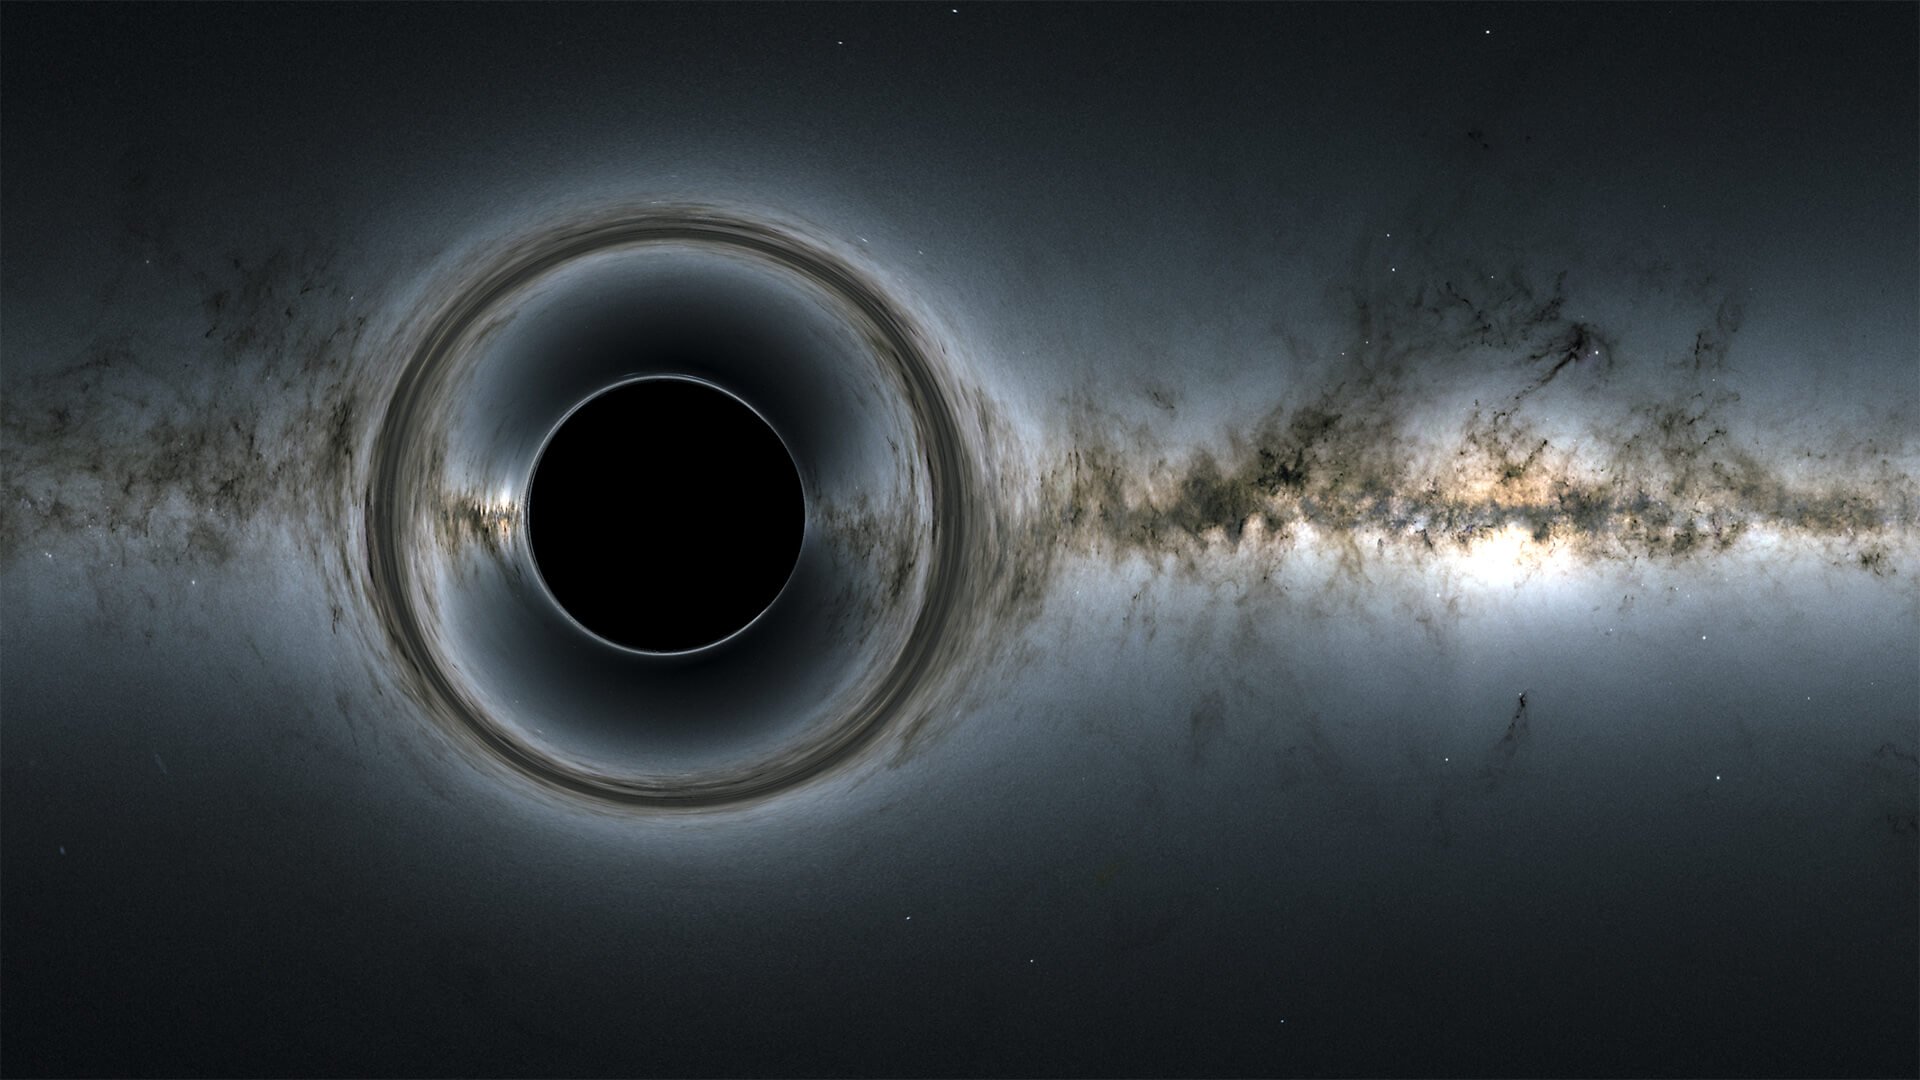 Scientists have discovered a new species of a black hole